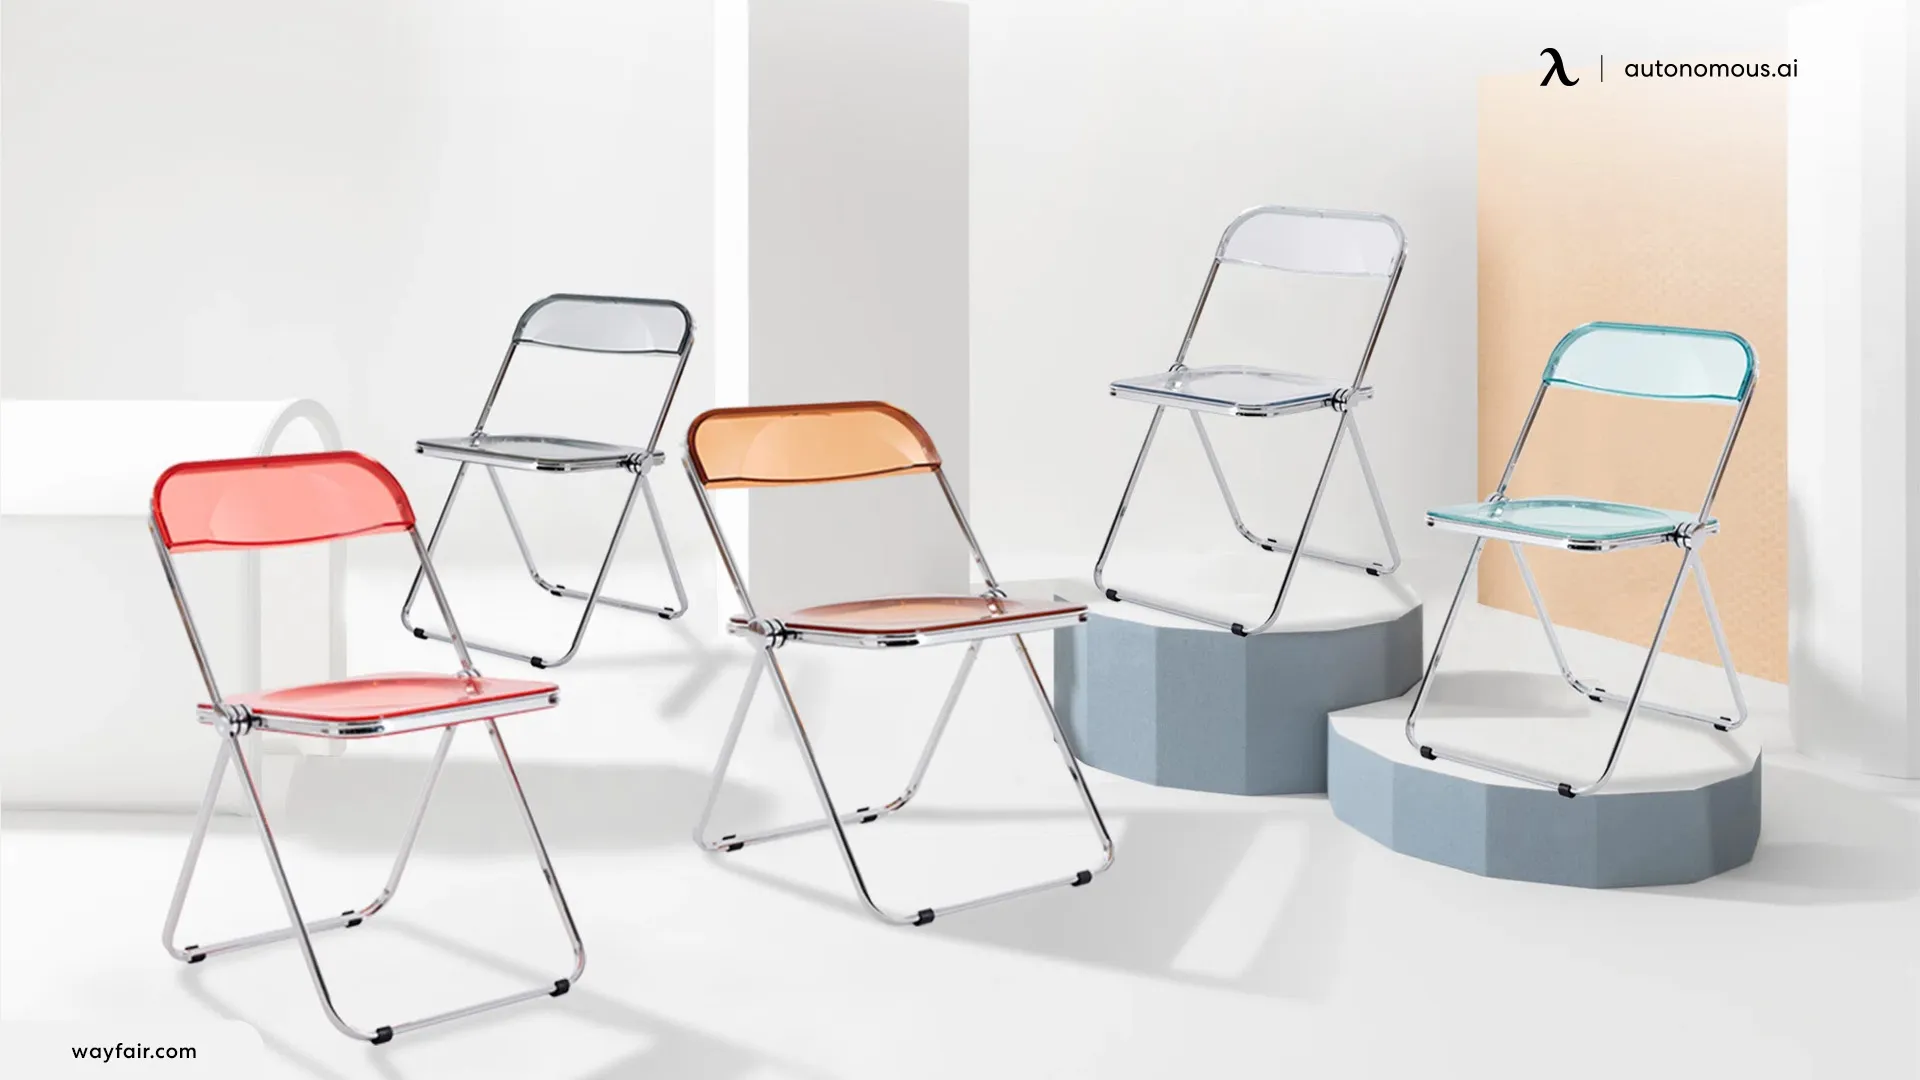 Folding Chairs That Can Be Stowed Away When Not in Use